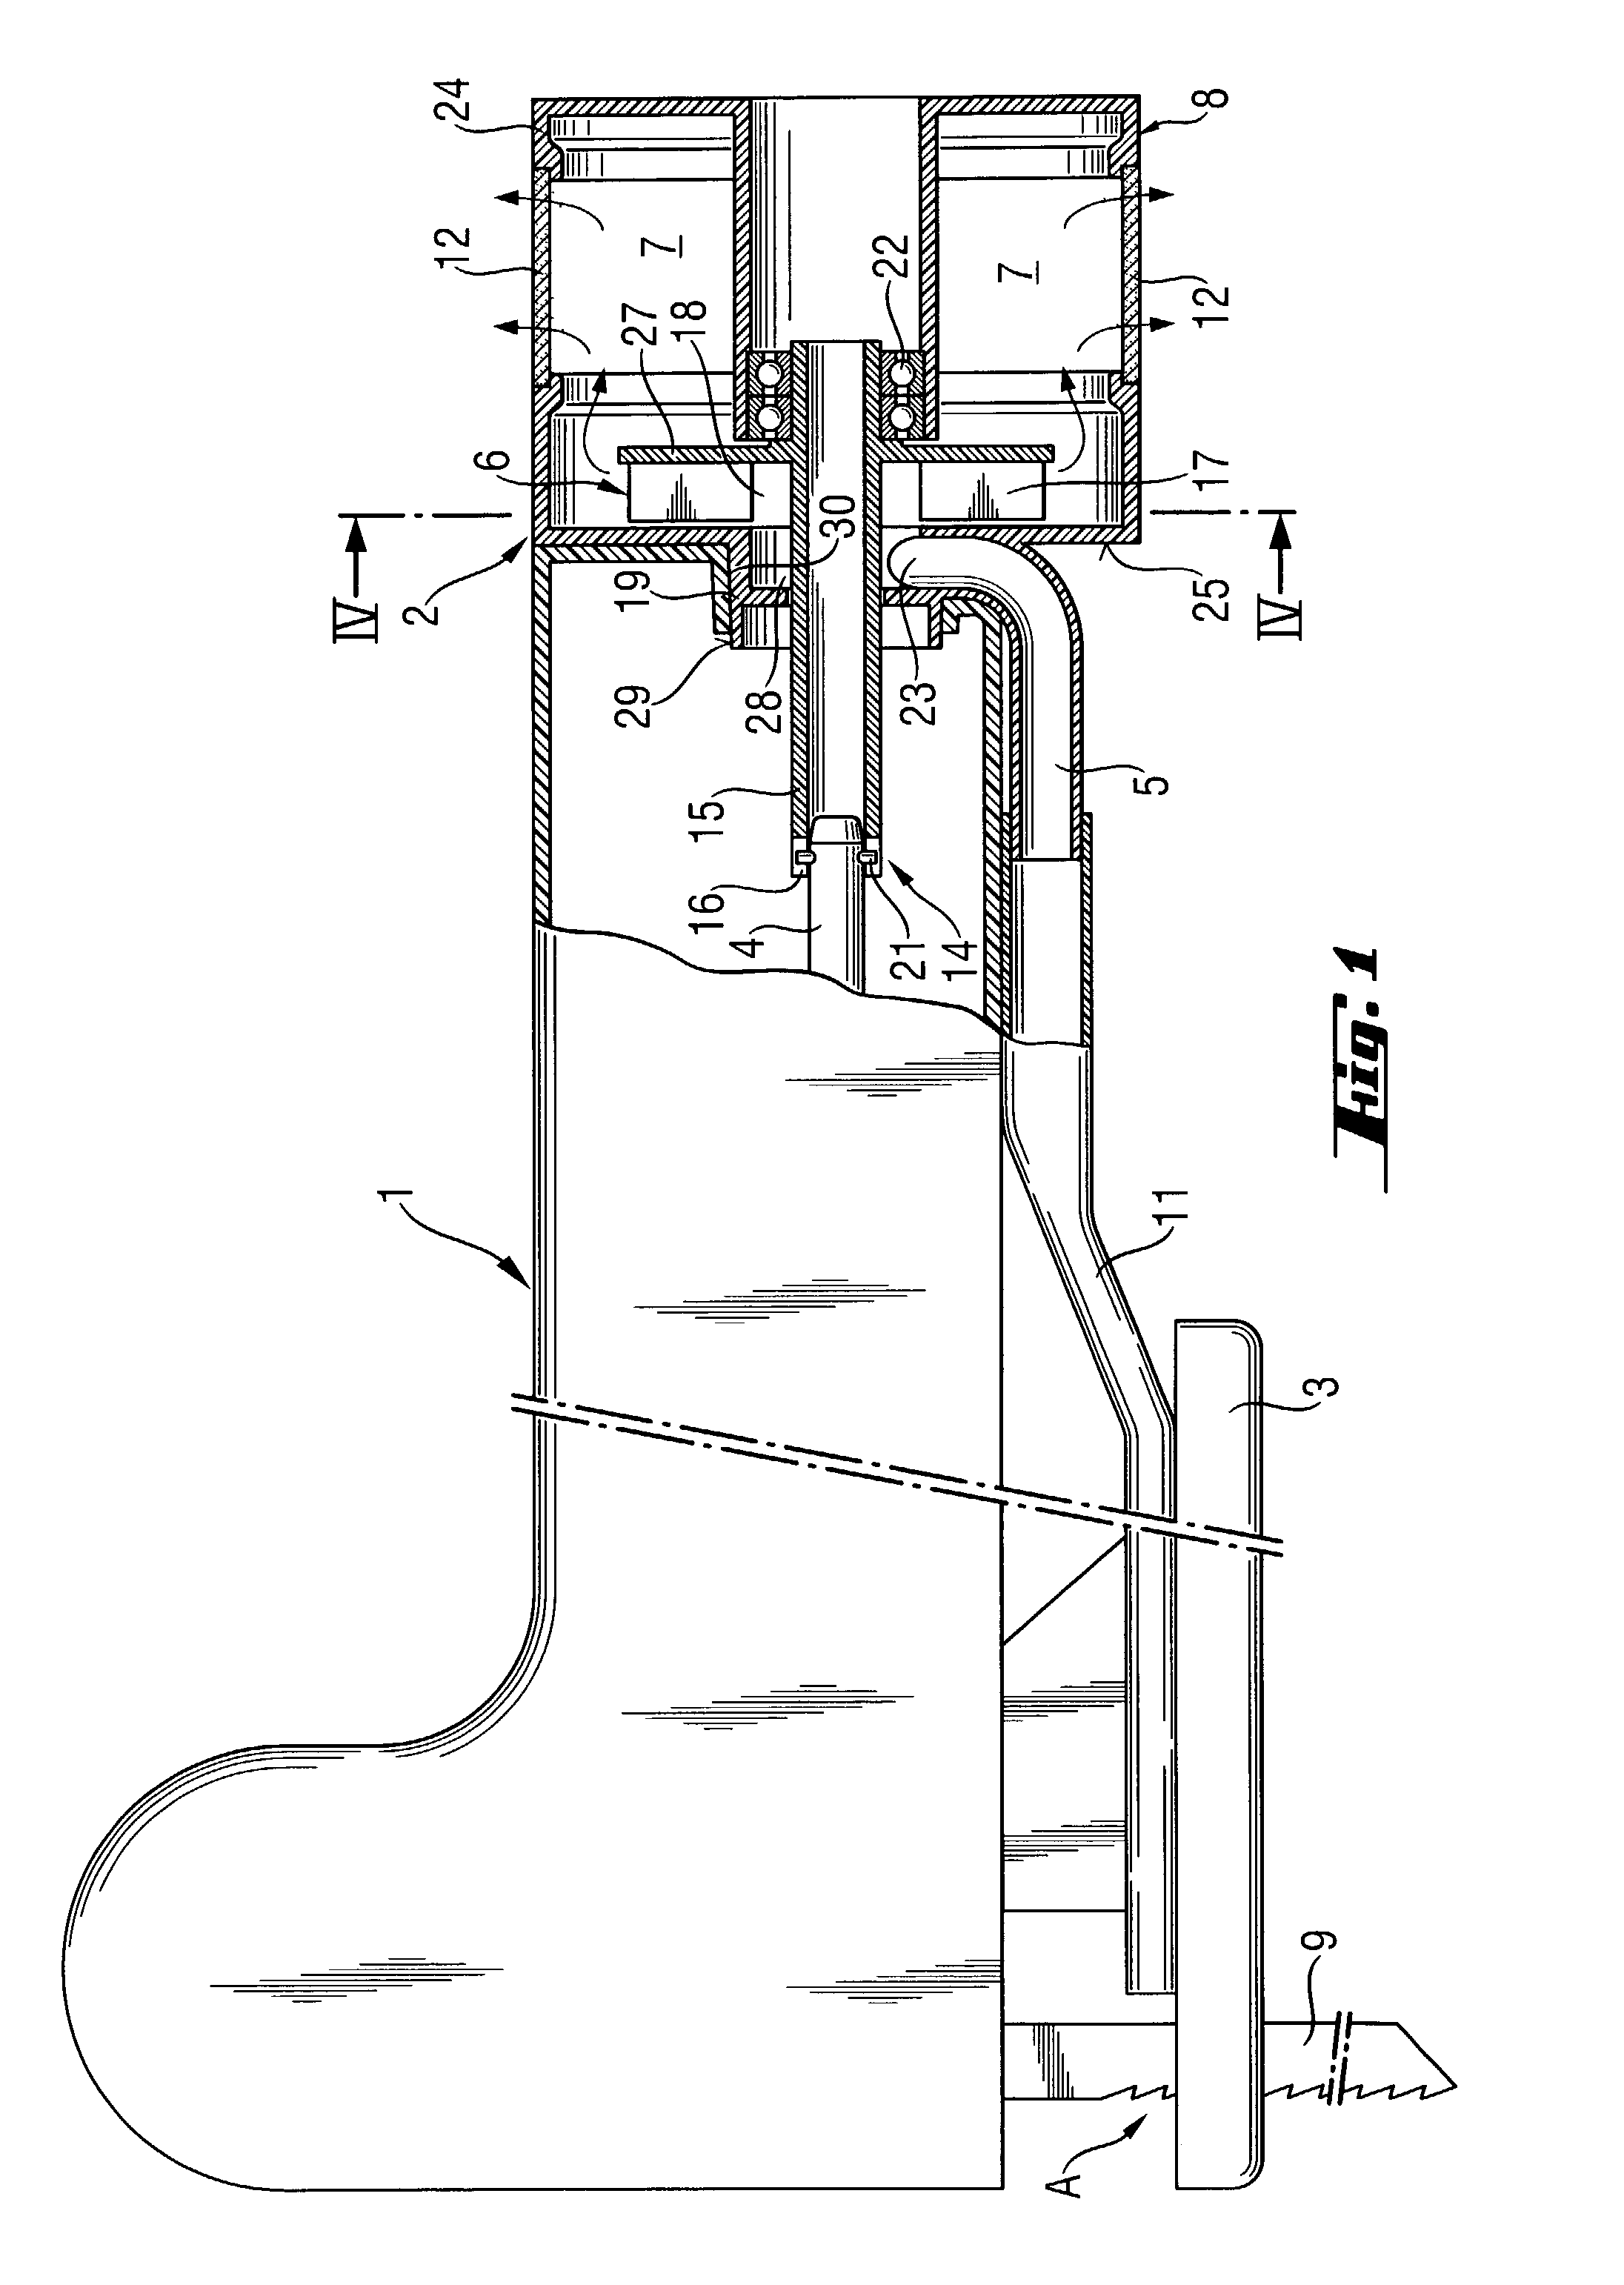 Hand-held power tool with a suction device